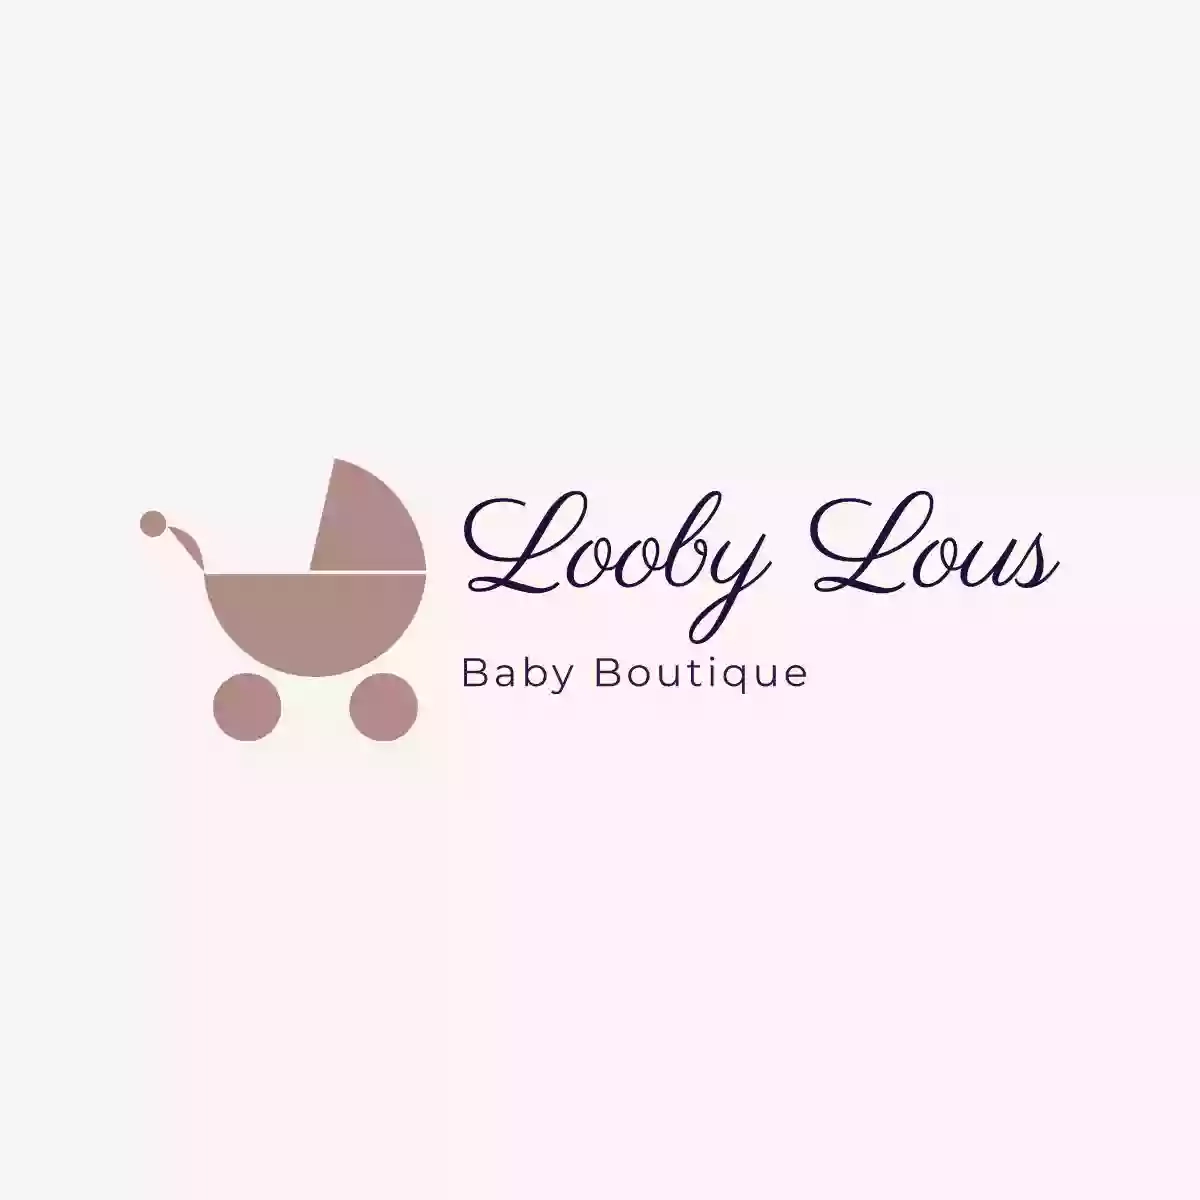 Looby Lou's